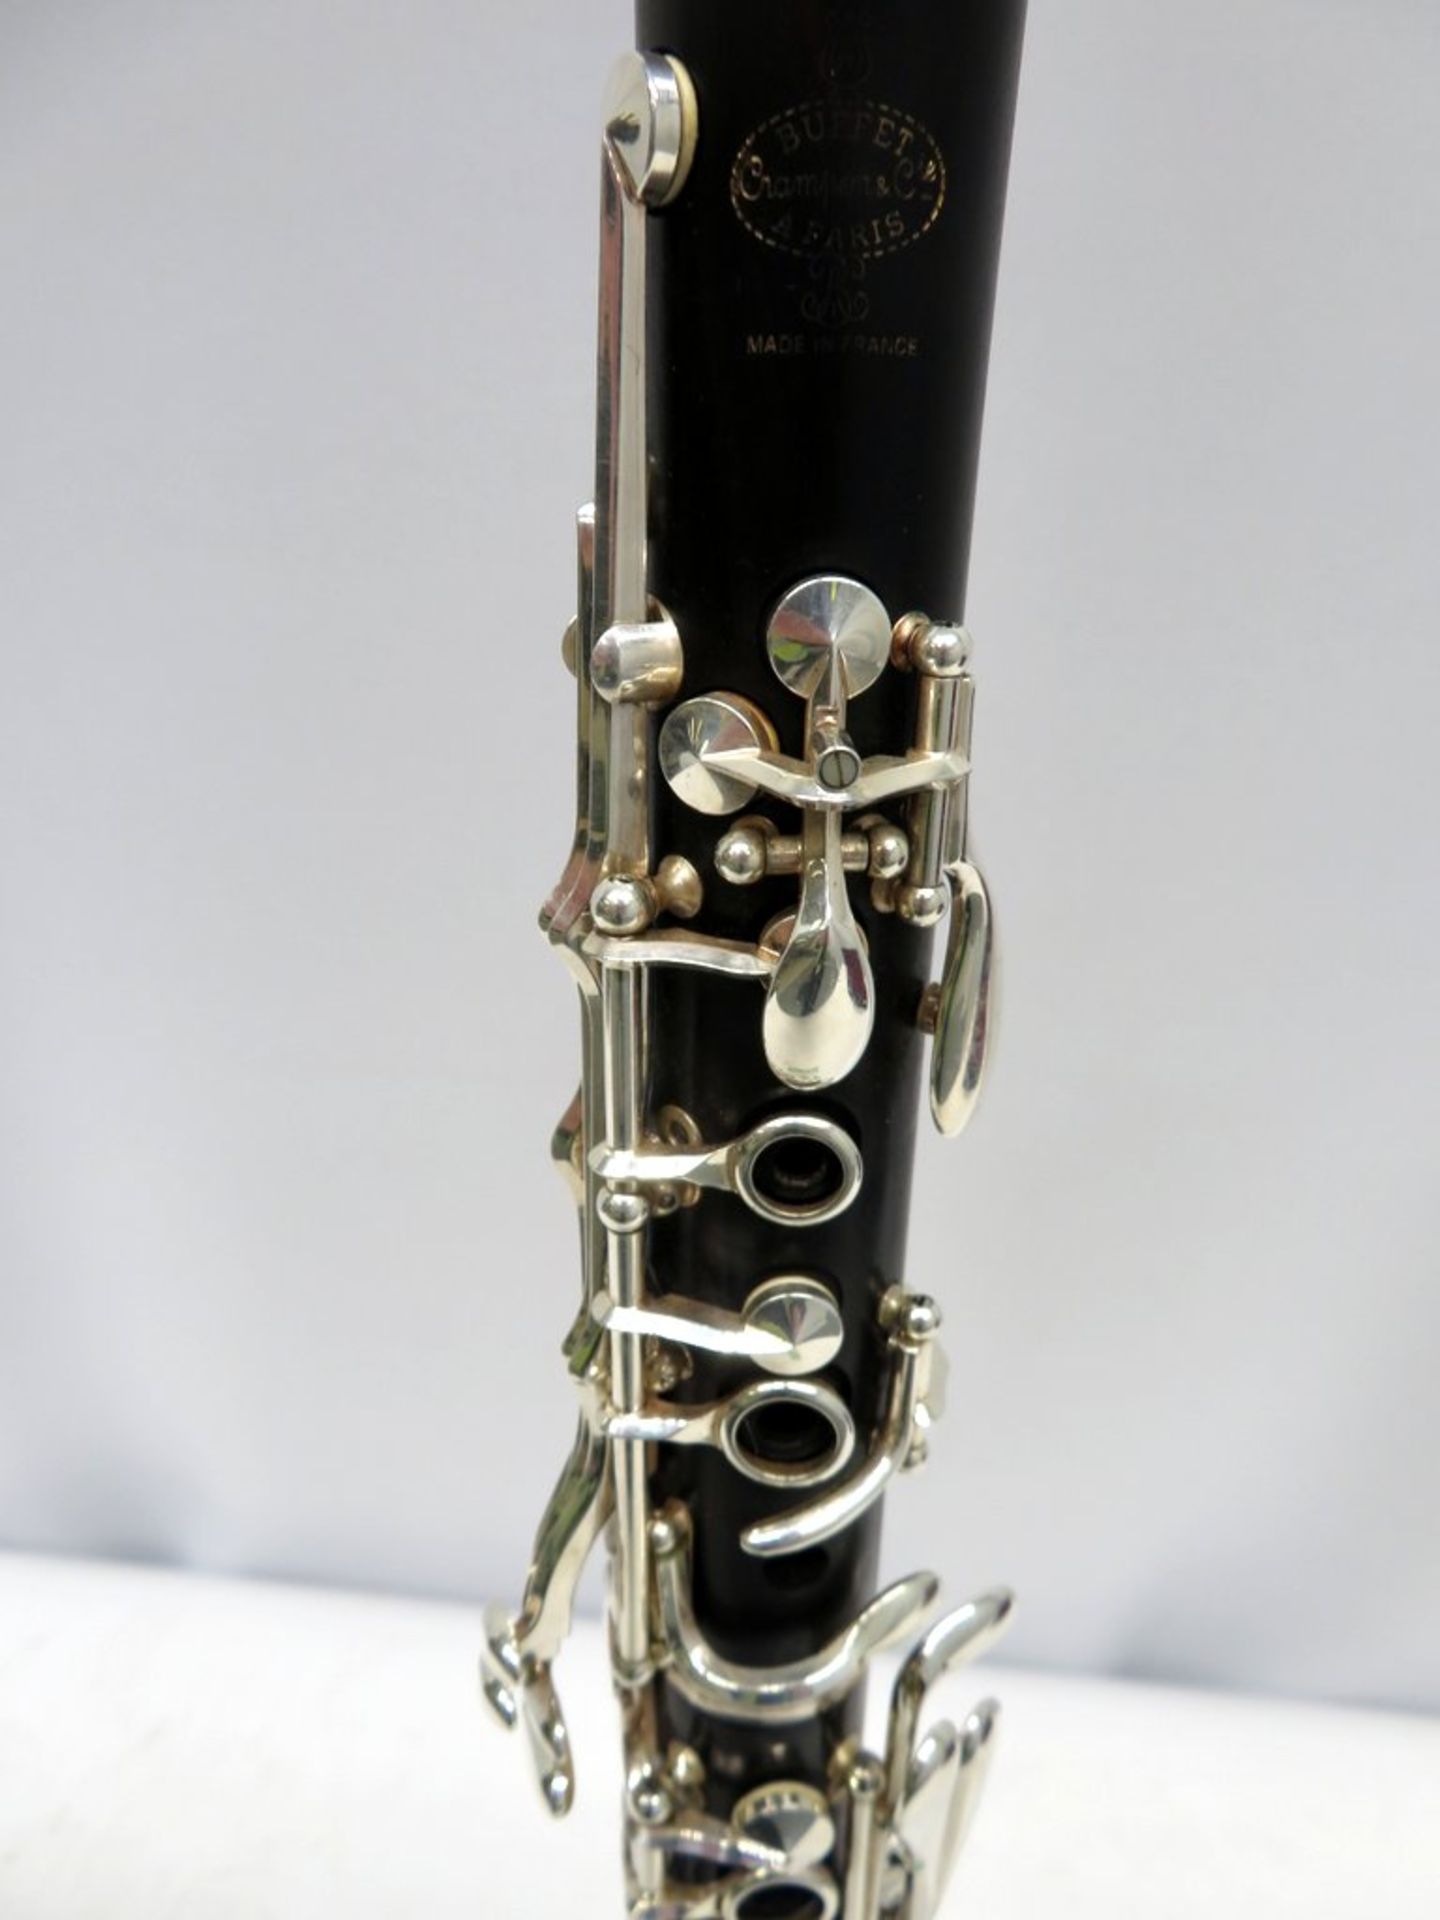 Buffet Crampon Clarinet Complete With Case. - Image 5 of 15